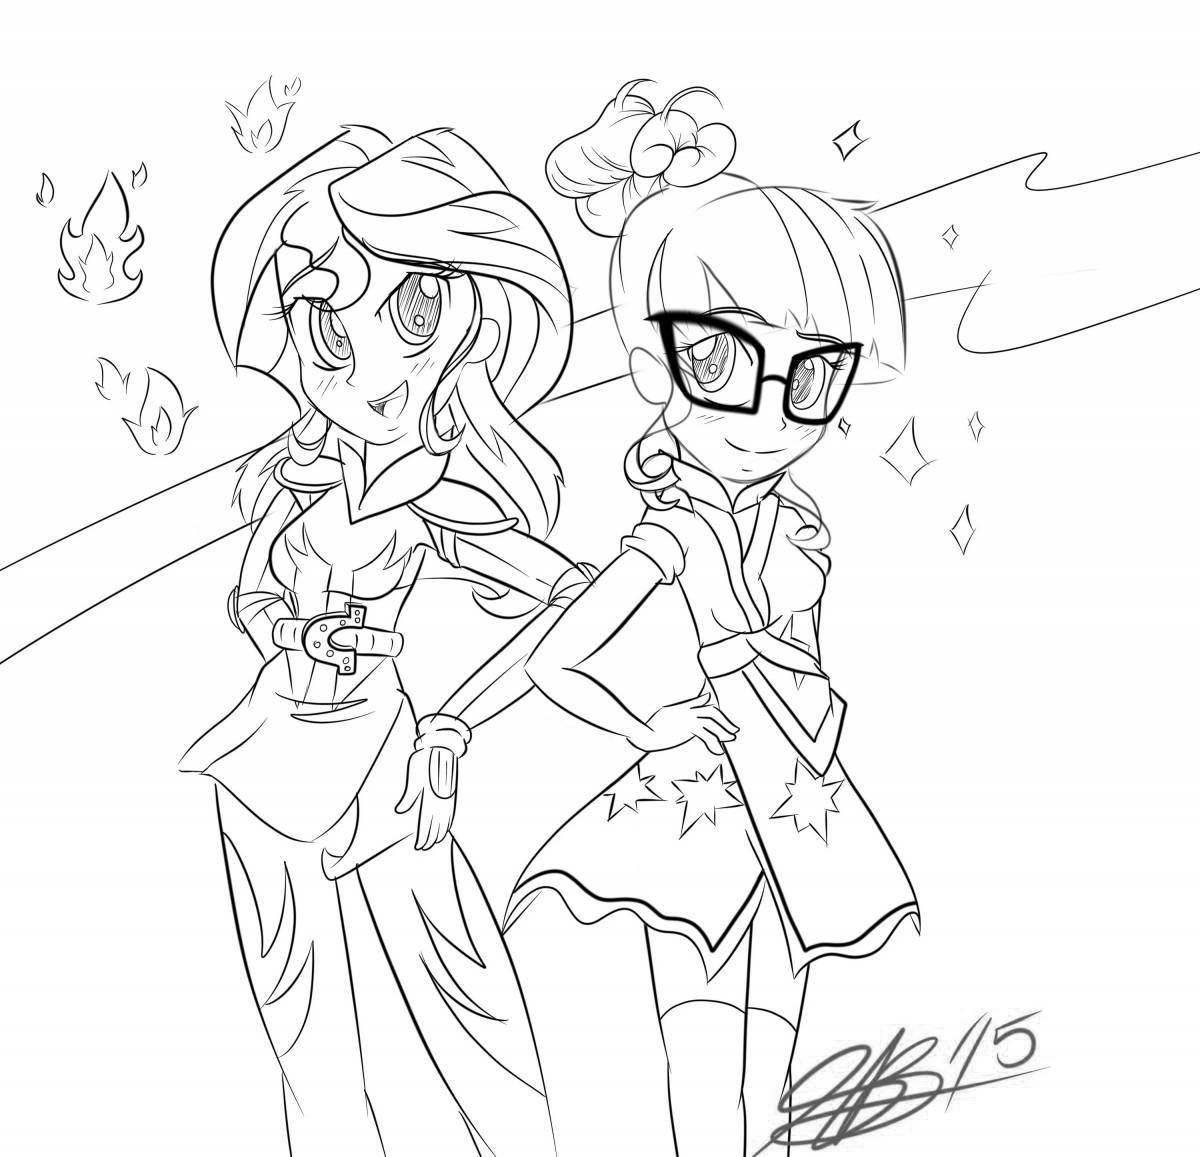 Blissful sunset shimmer coloring page